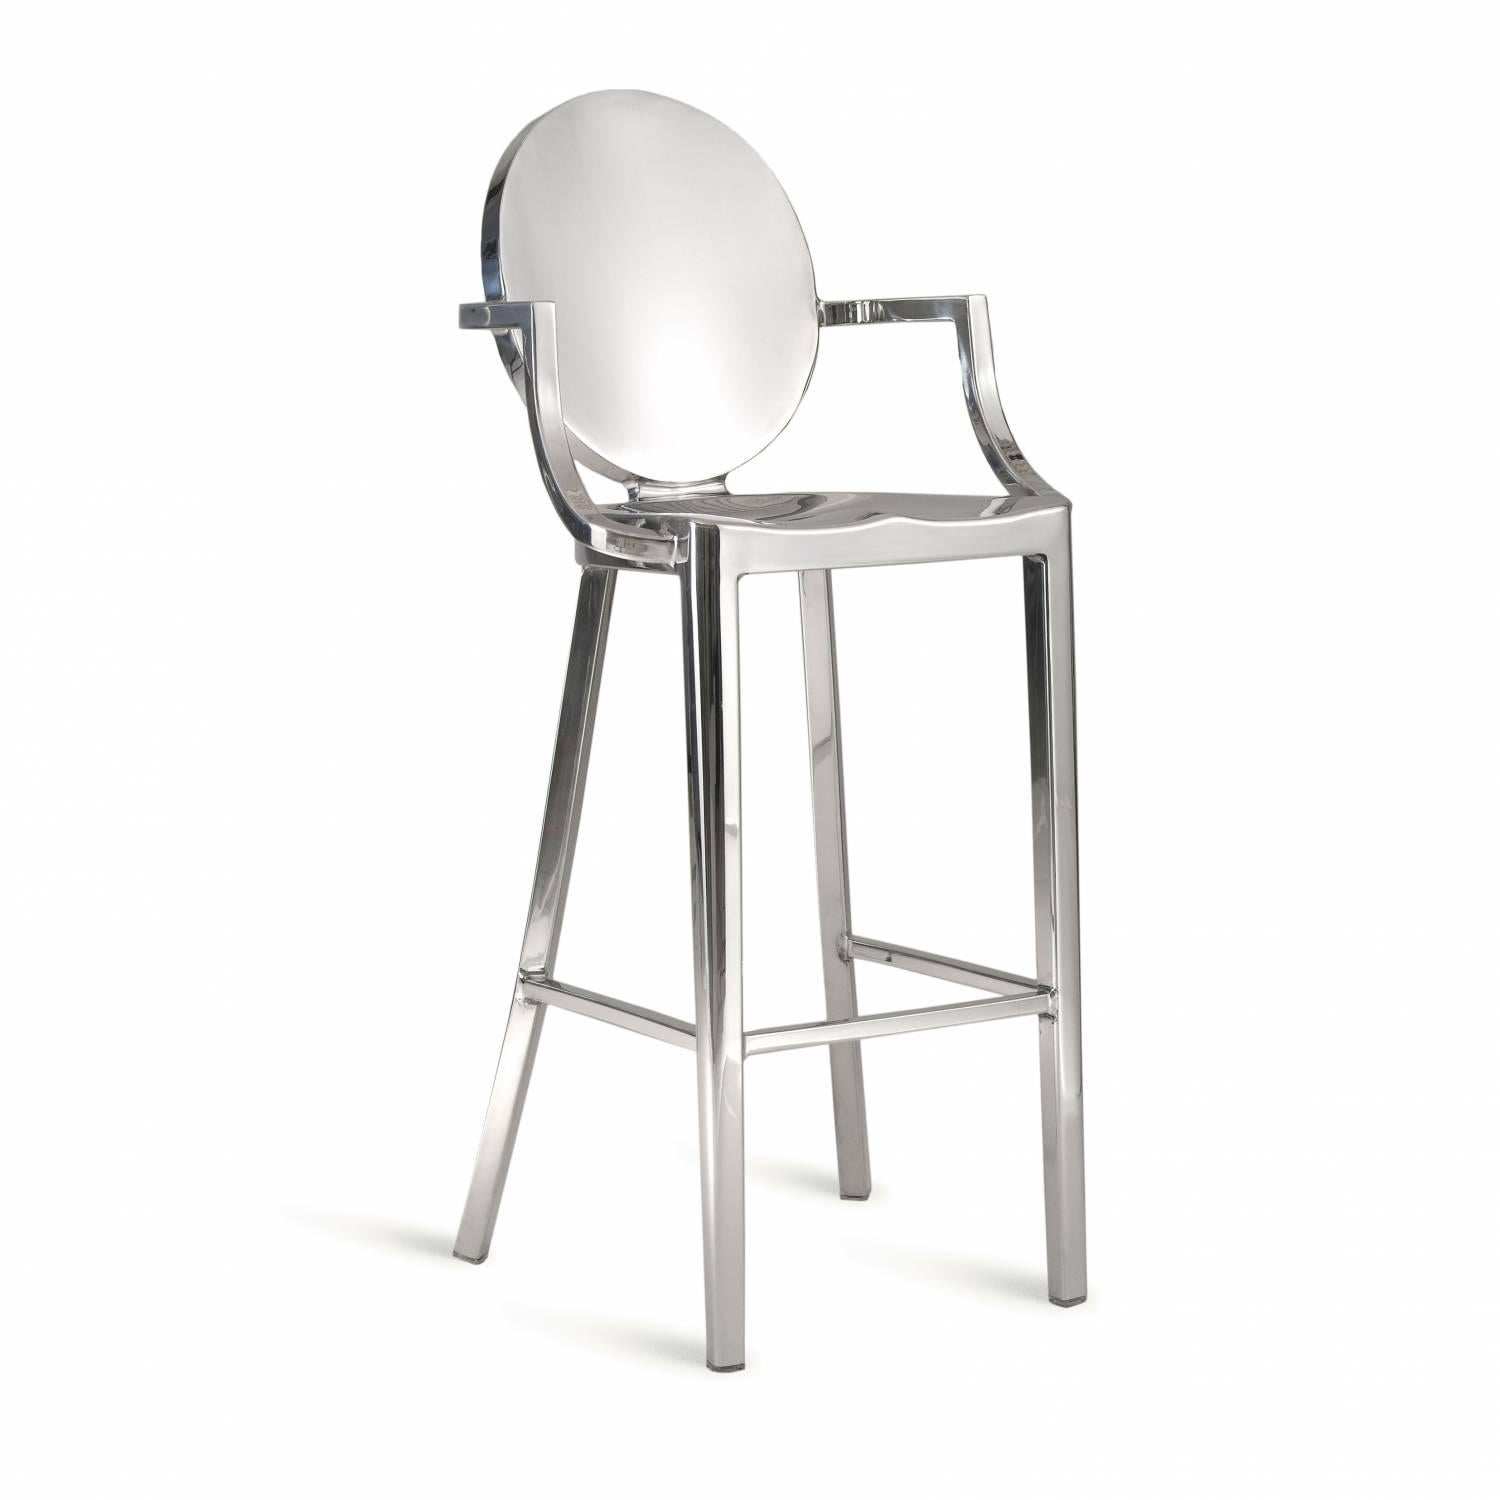 Starck first designed the Kong barstool for the Chinese restaurant Kong in Paris. The one armed stool was intended to make it easy and graceful for the super model clientele to slither in and out of the bar. Kong requires the hand welding of 24